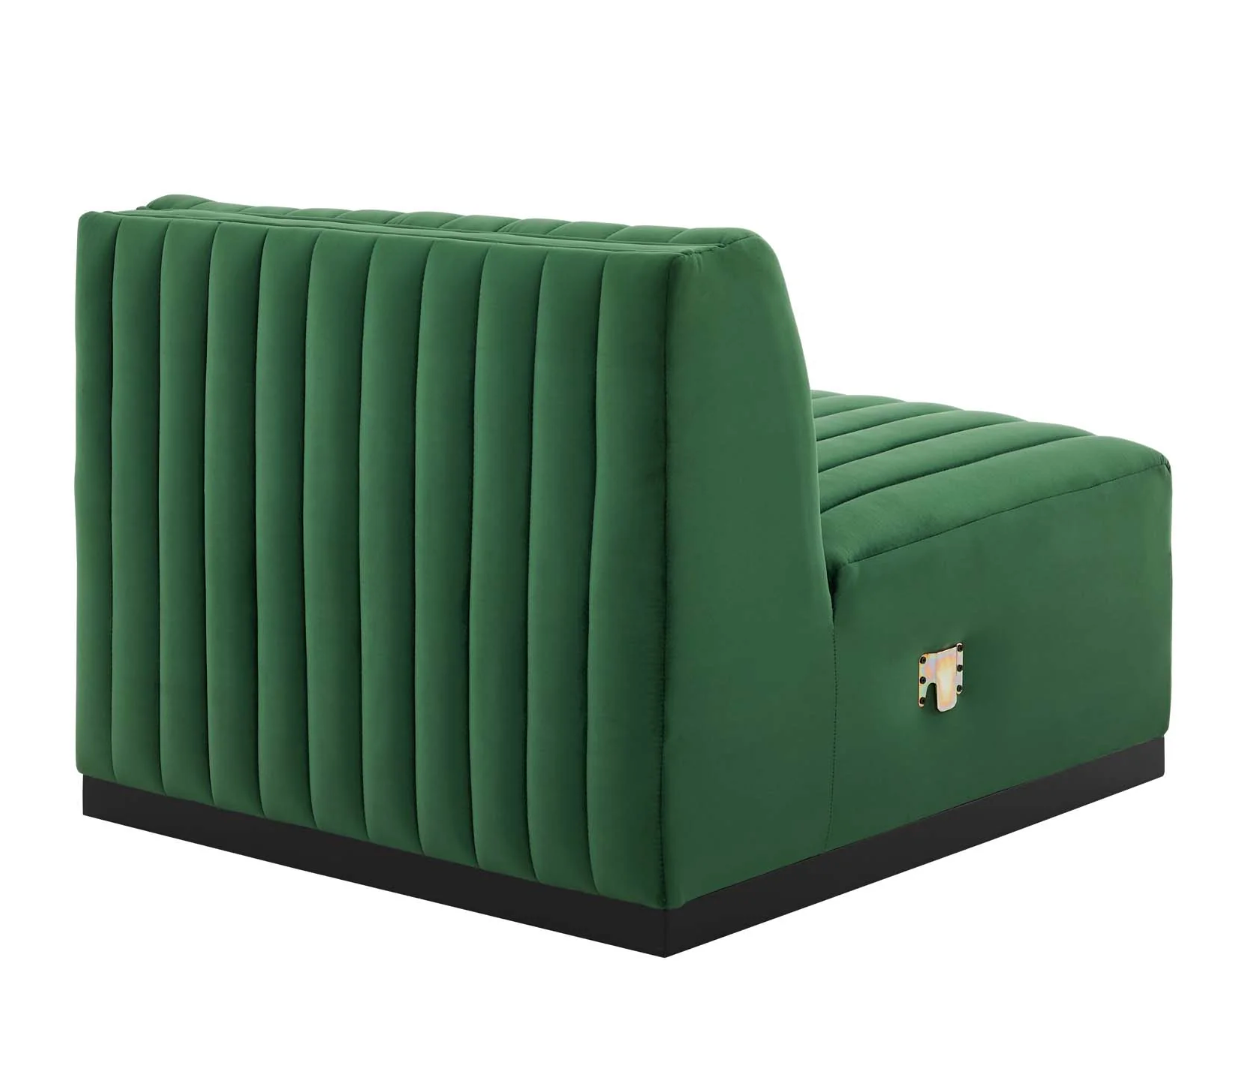 Channel Tufted Emerald Green Velvet Armless Chair Sectional Sofa  Piece